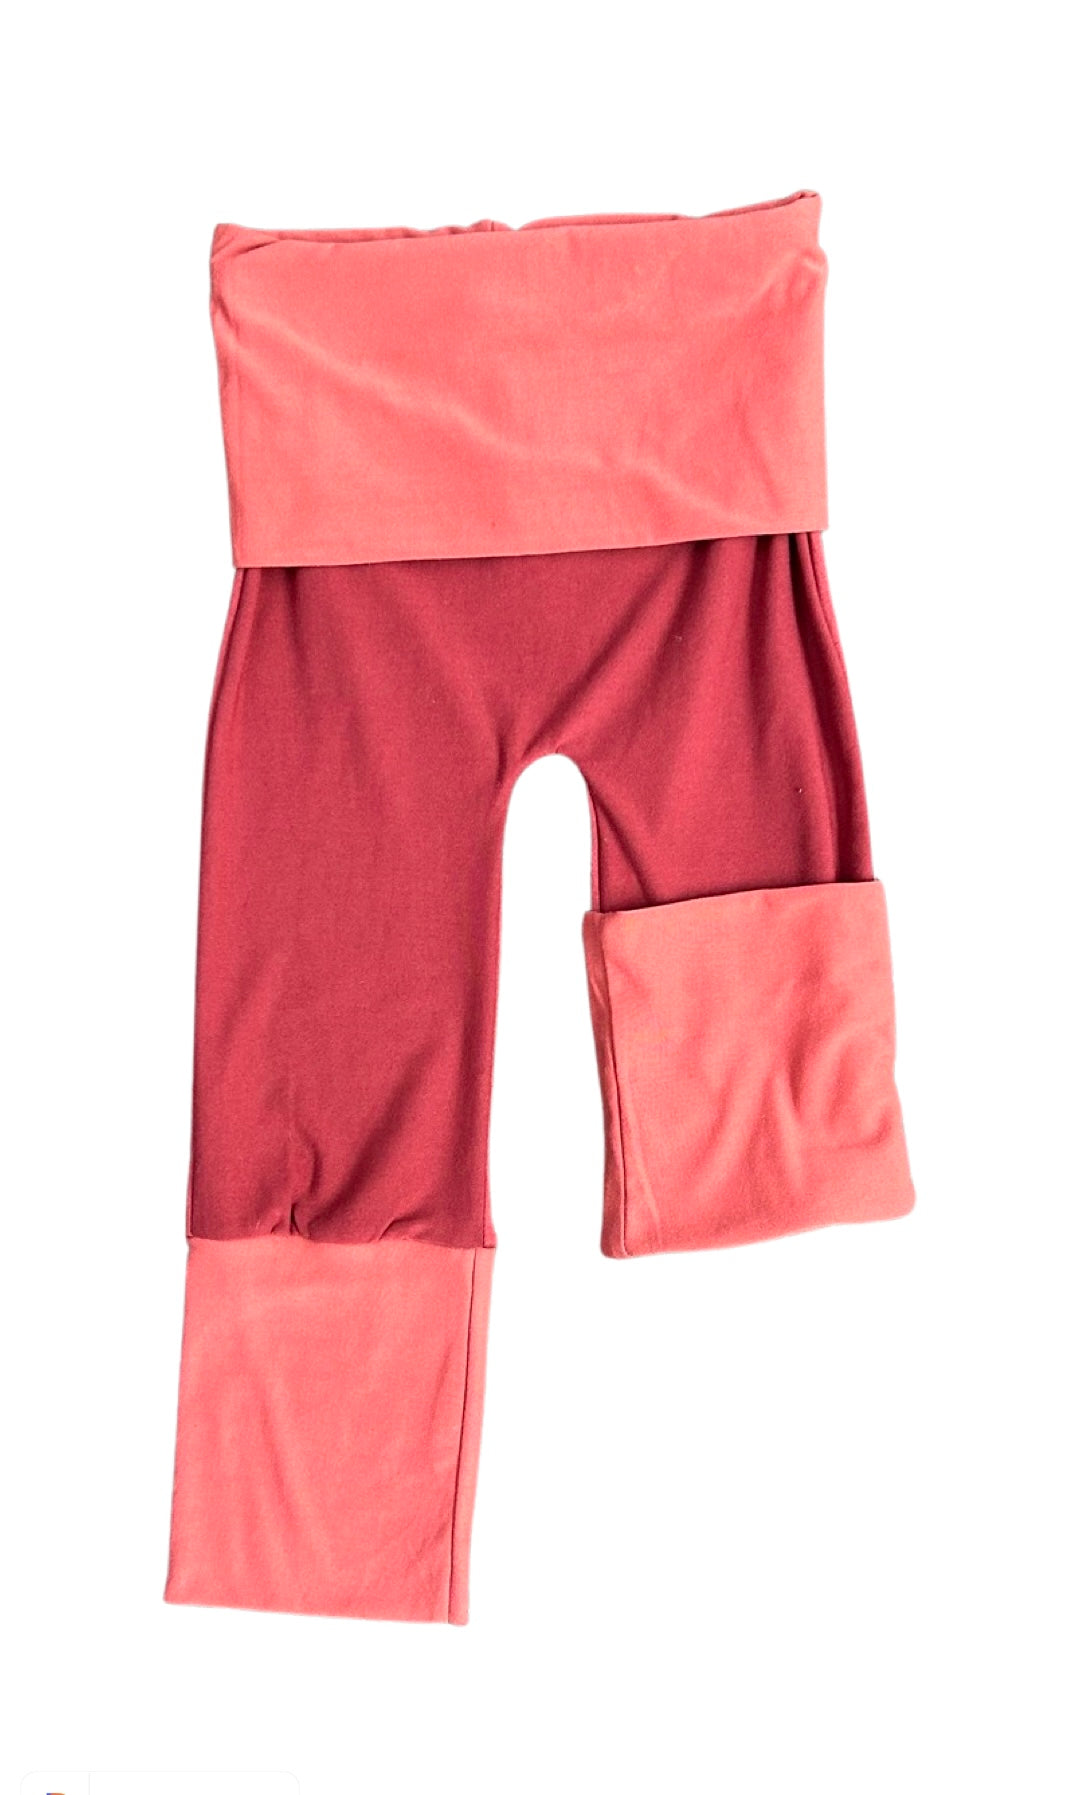 Adjustable Pants - Red with Pink